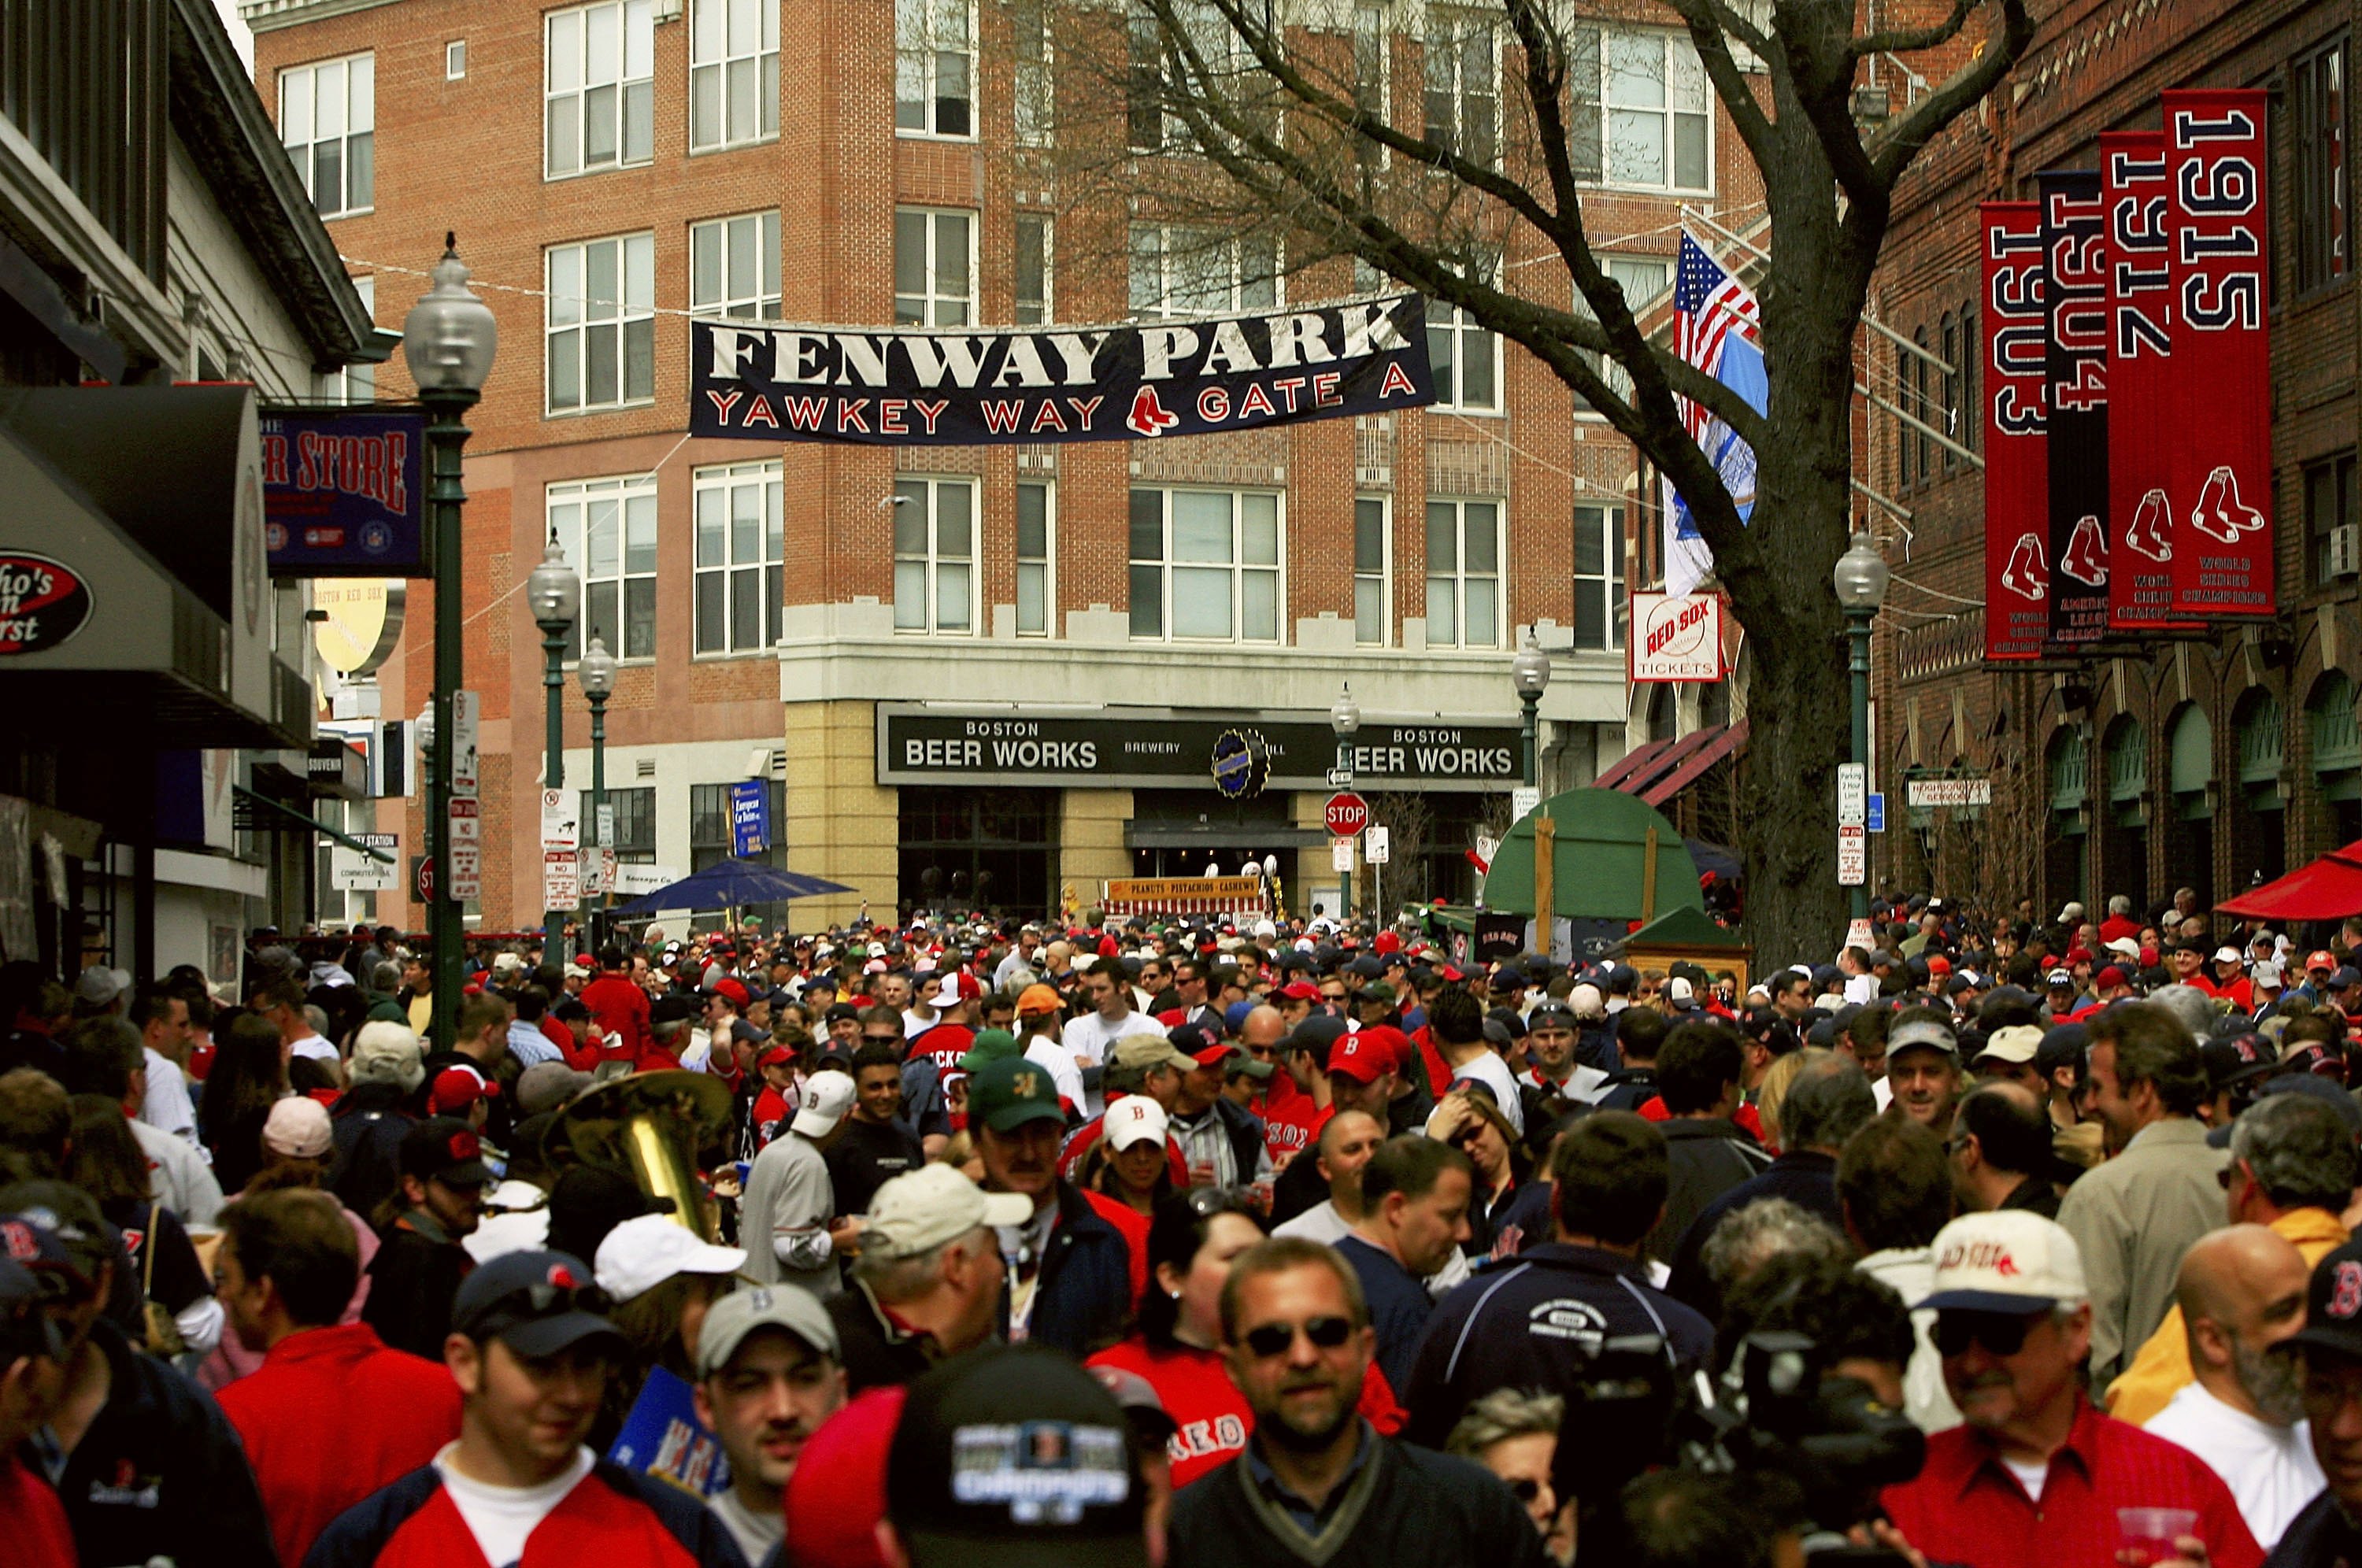 Red Sox Wants Boston to Change Name of Yawkey Way to be More Inclusive -  InsideHook